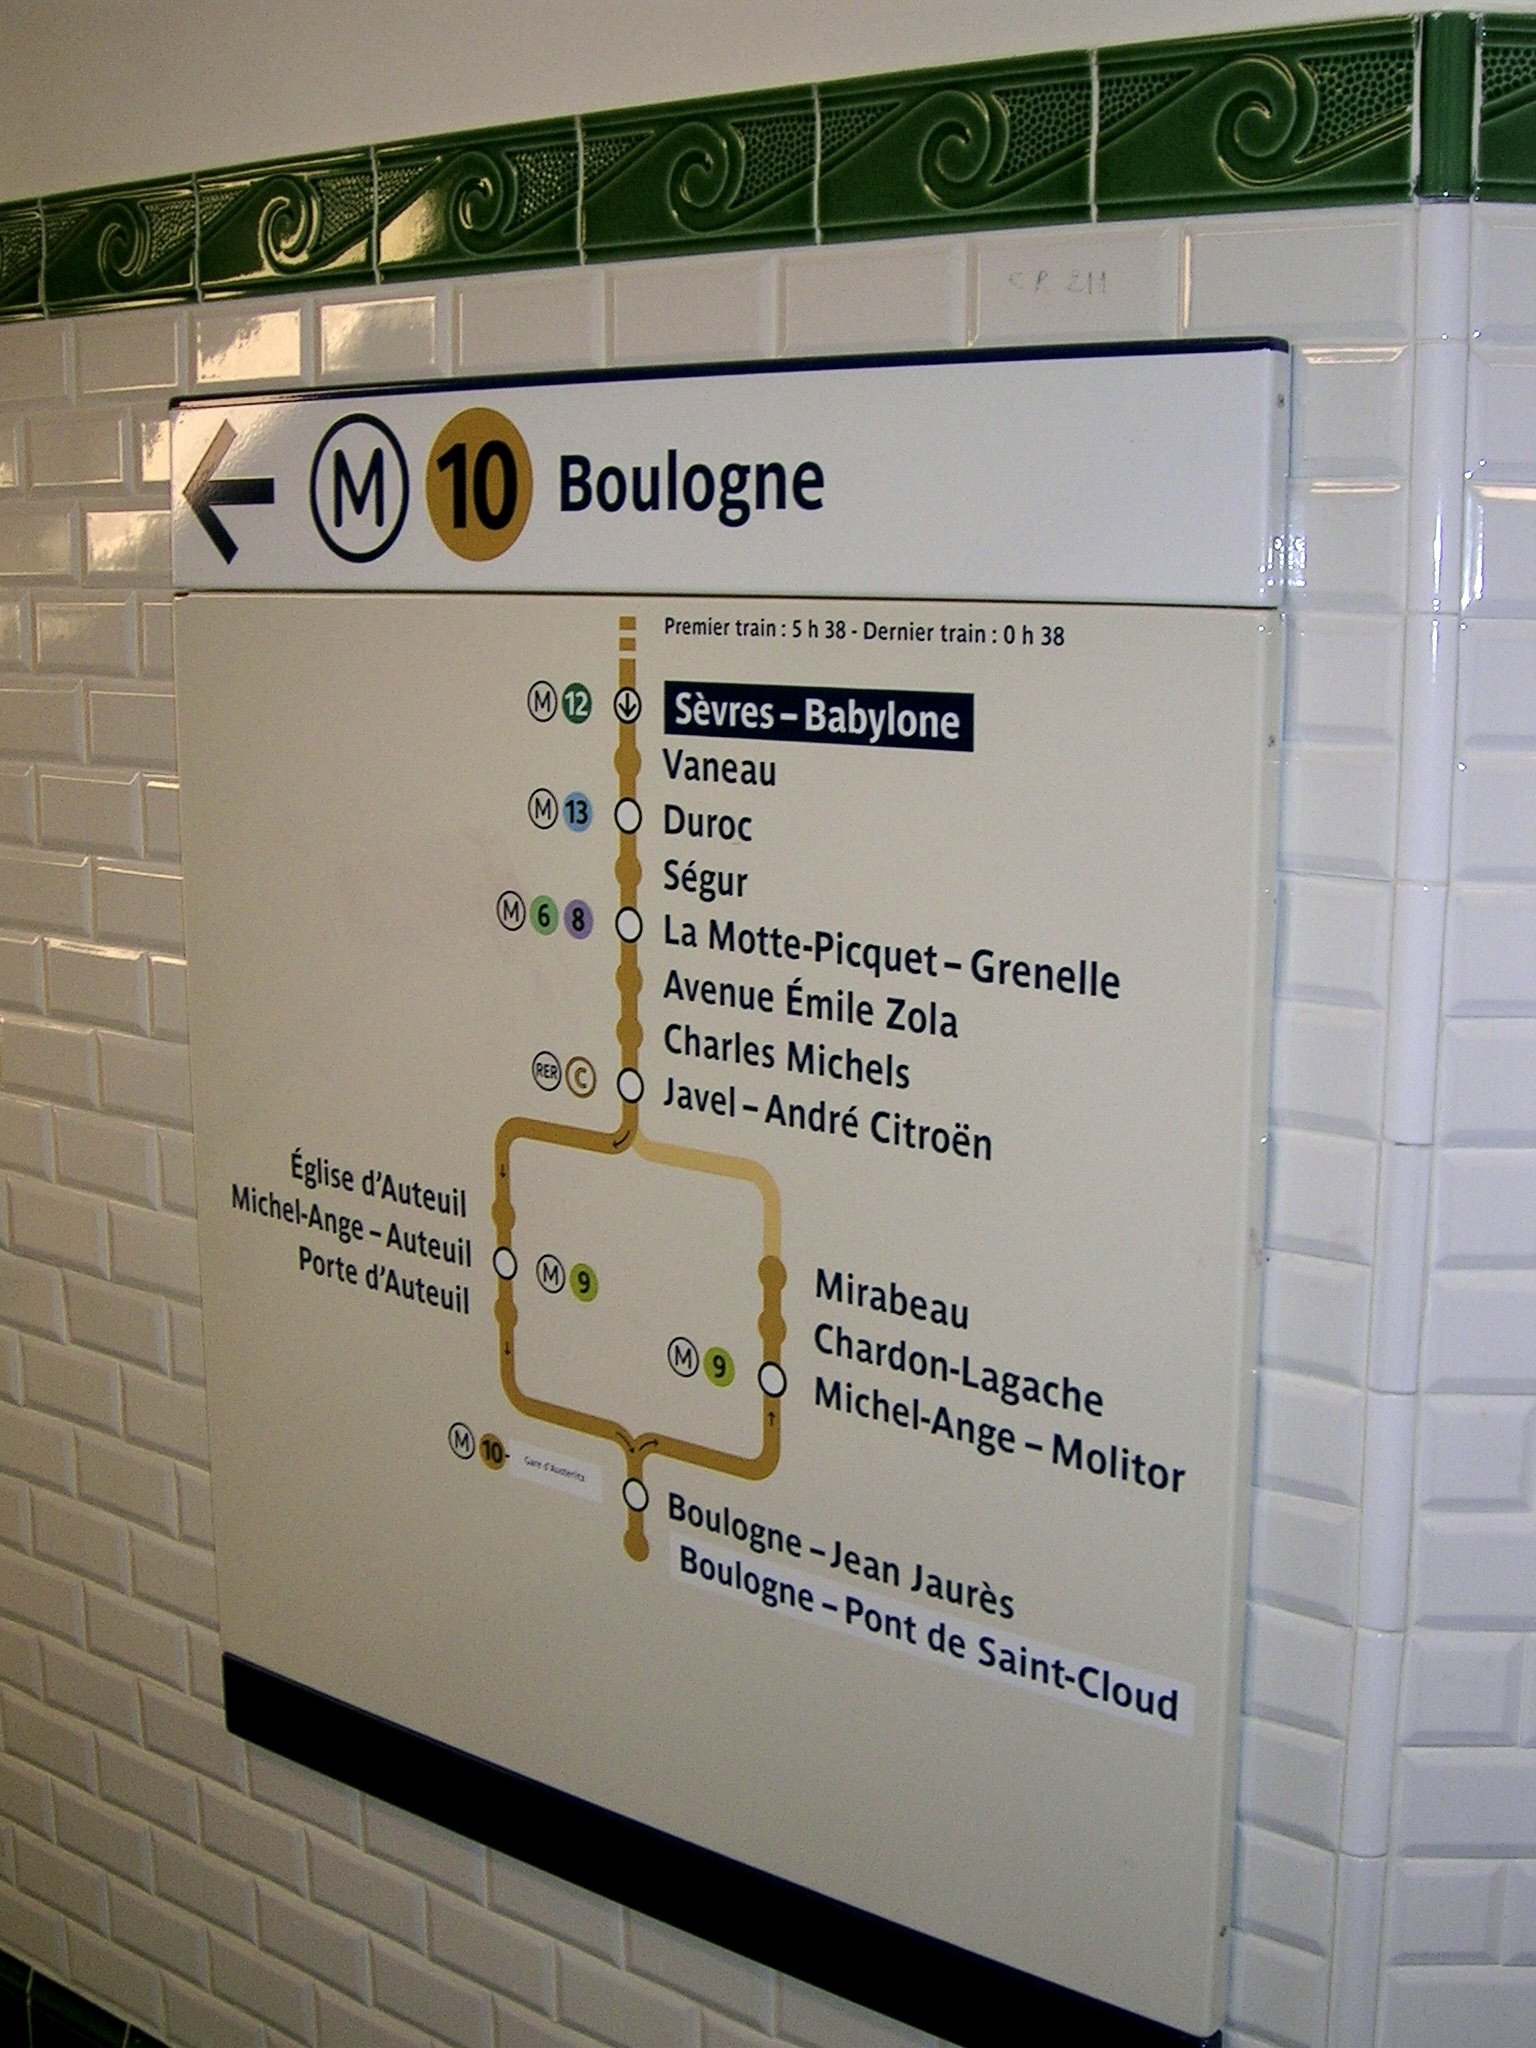  Paris, France.  It’s great for tourists that subway maps around the world have similar graphics.  